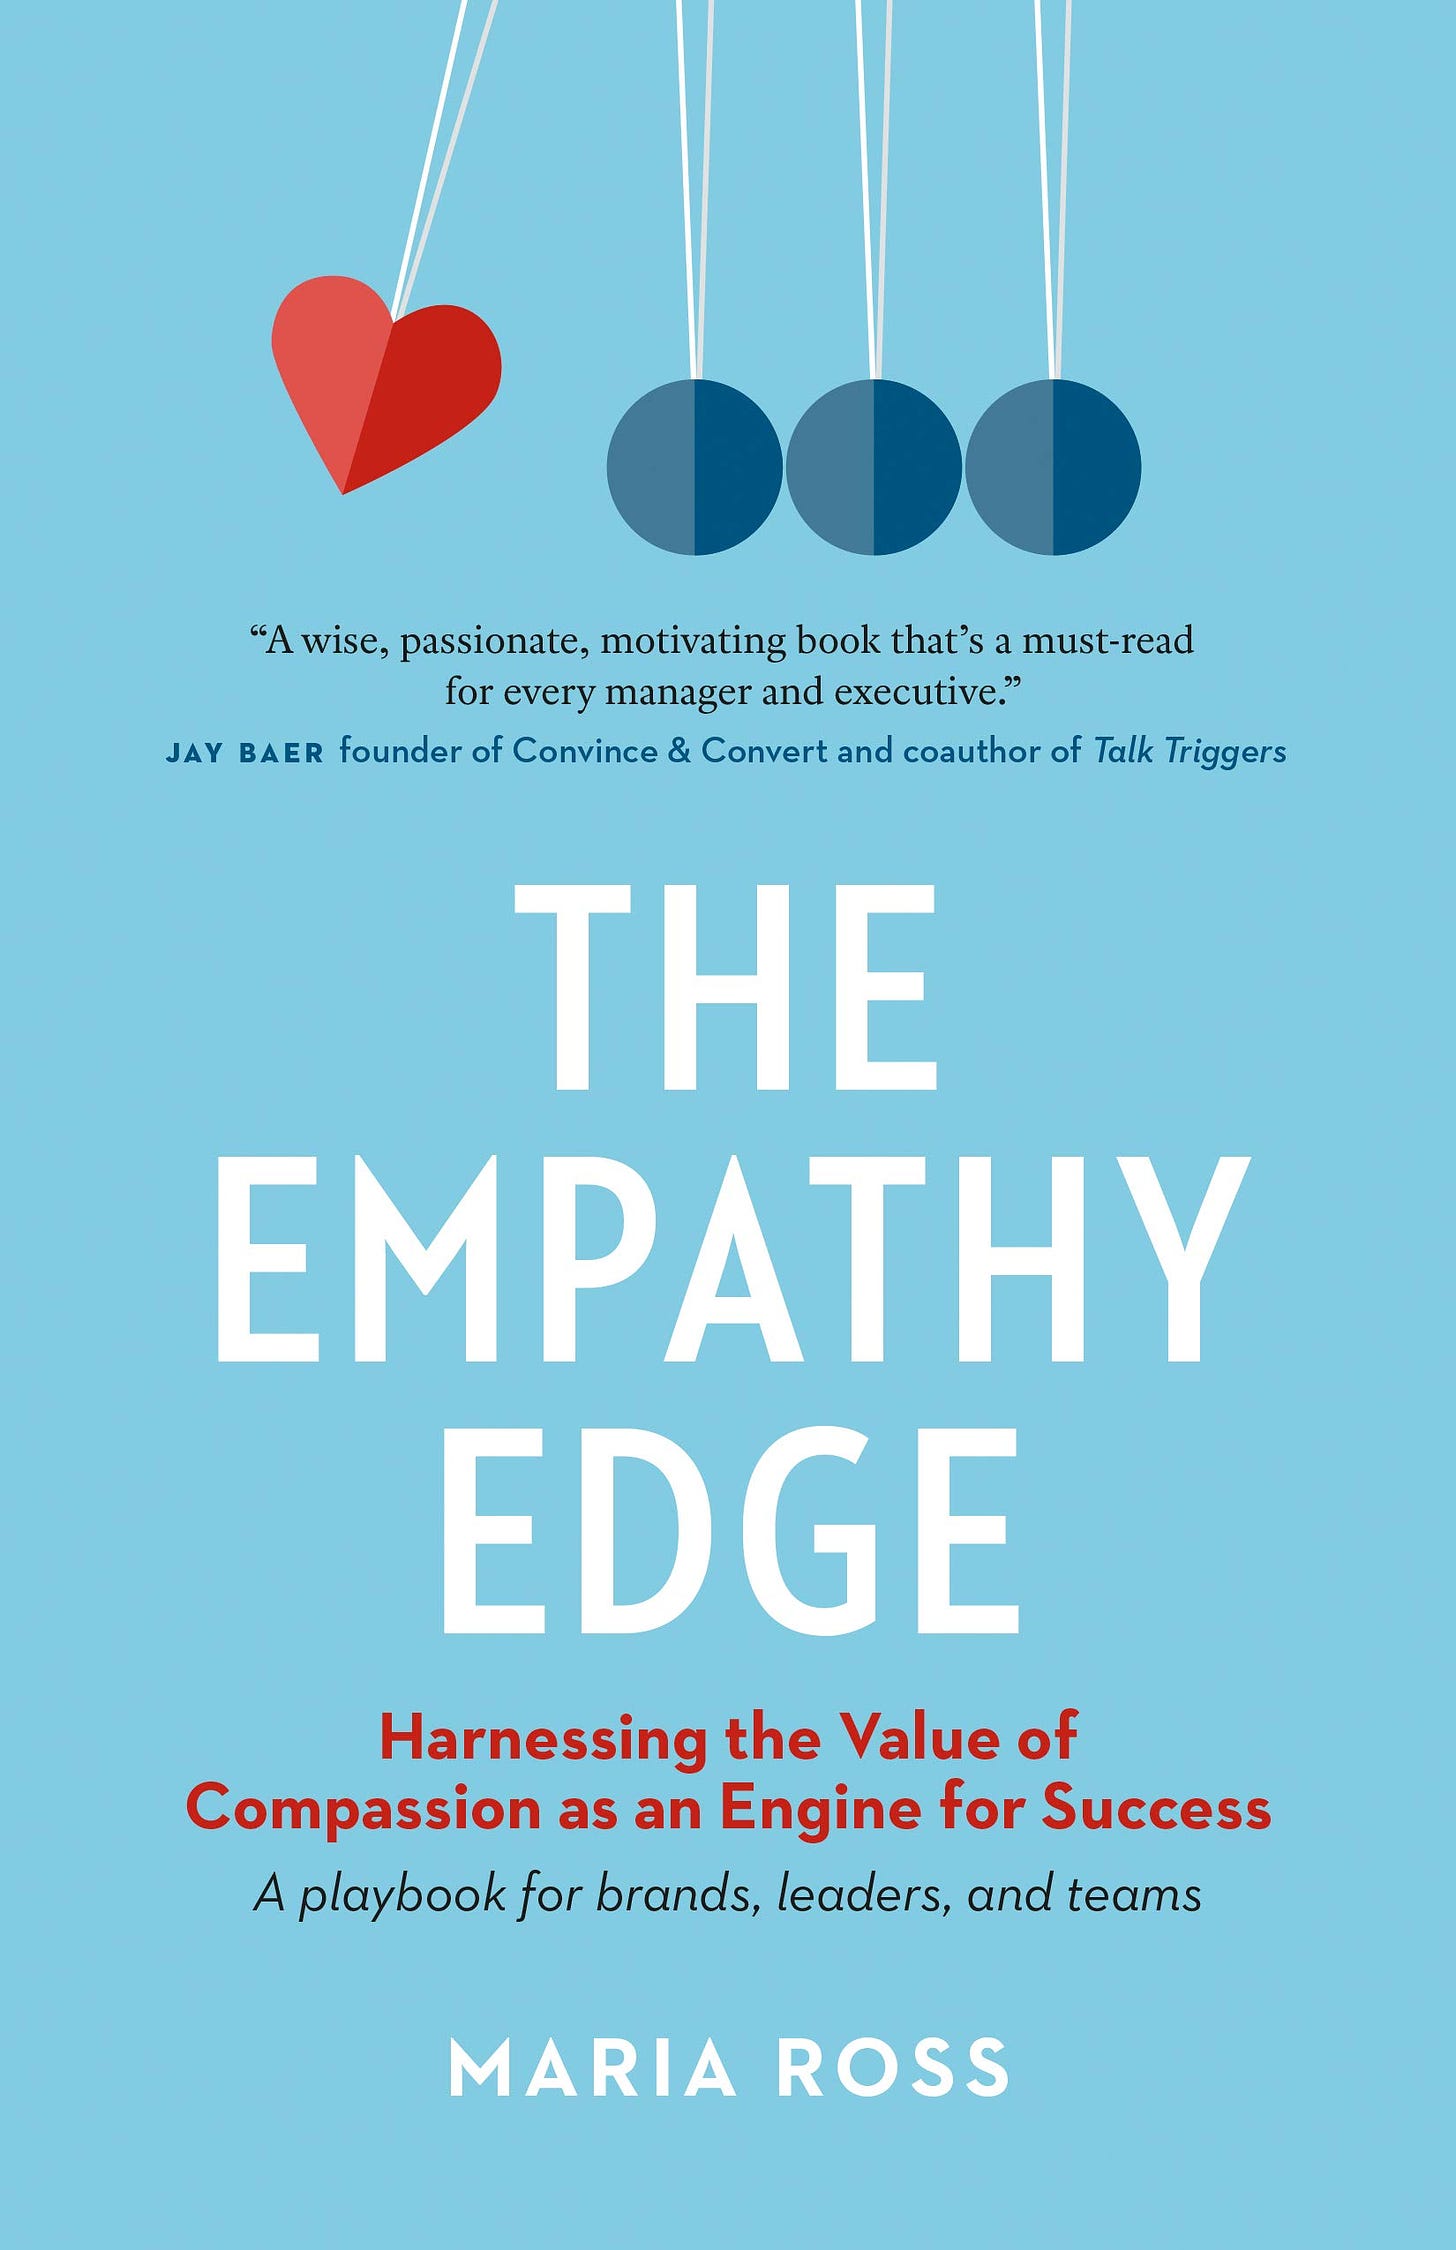 Book cover: The Empathy Edge by Maria Ross